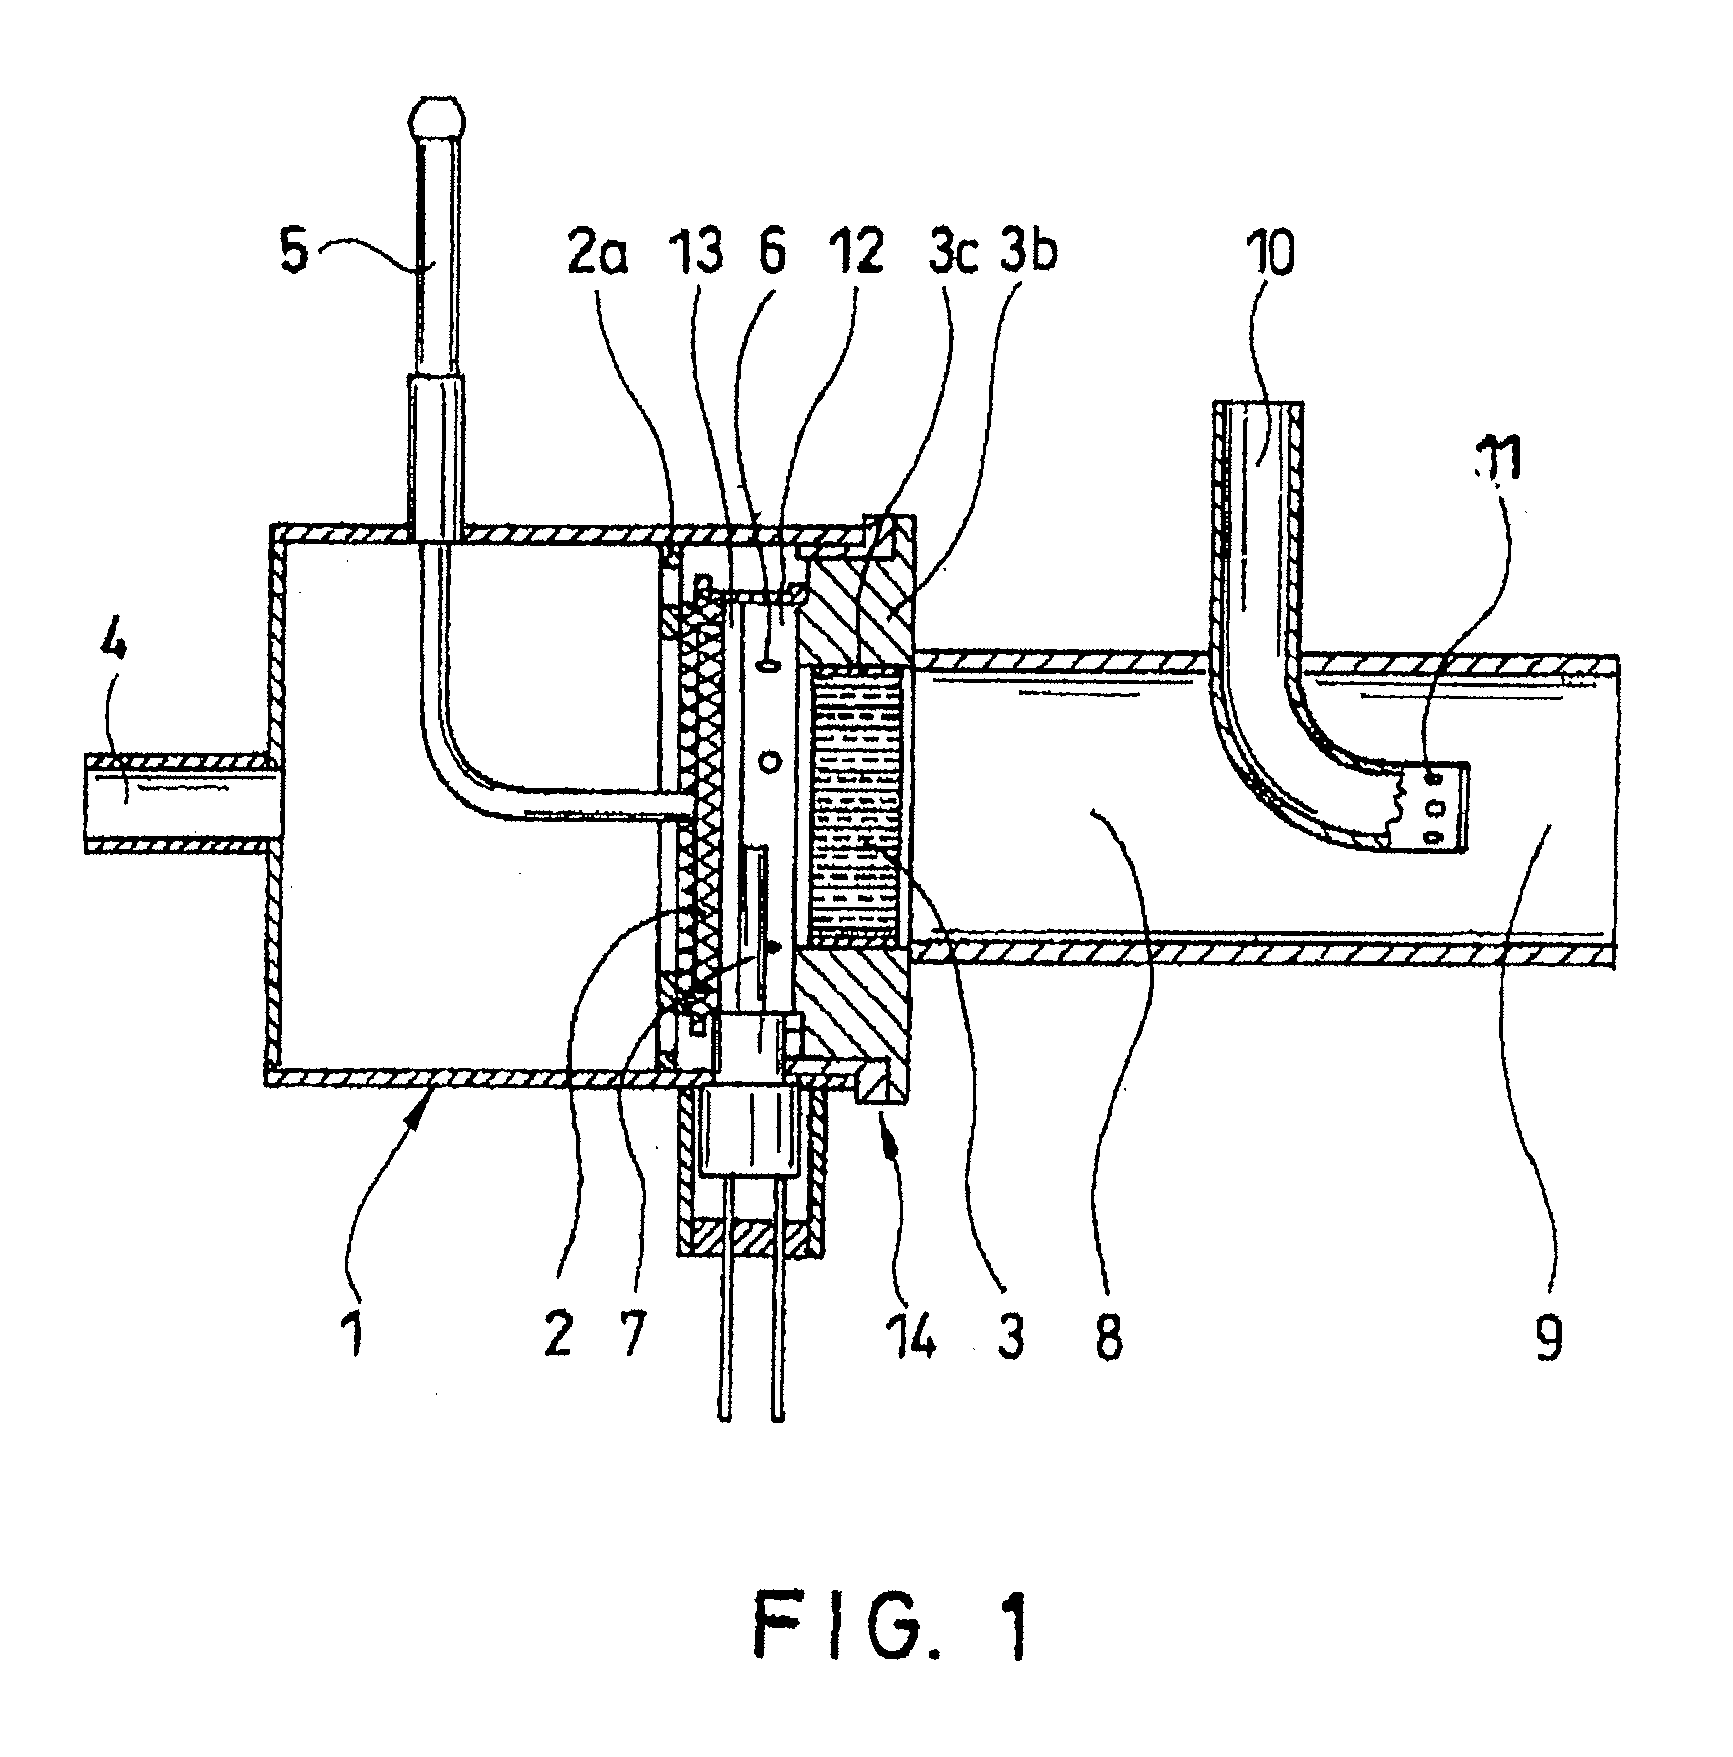 Device and Method For Preparing a Homogeneous Mixture Consisting of Fuel and Oxidants